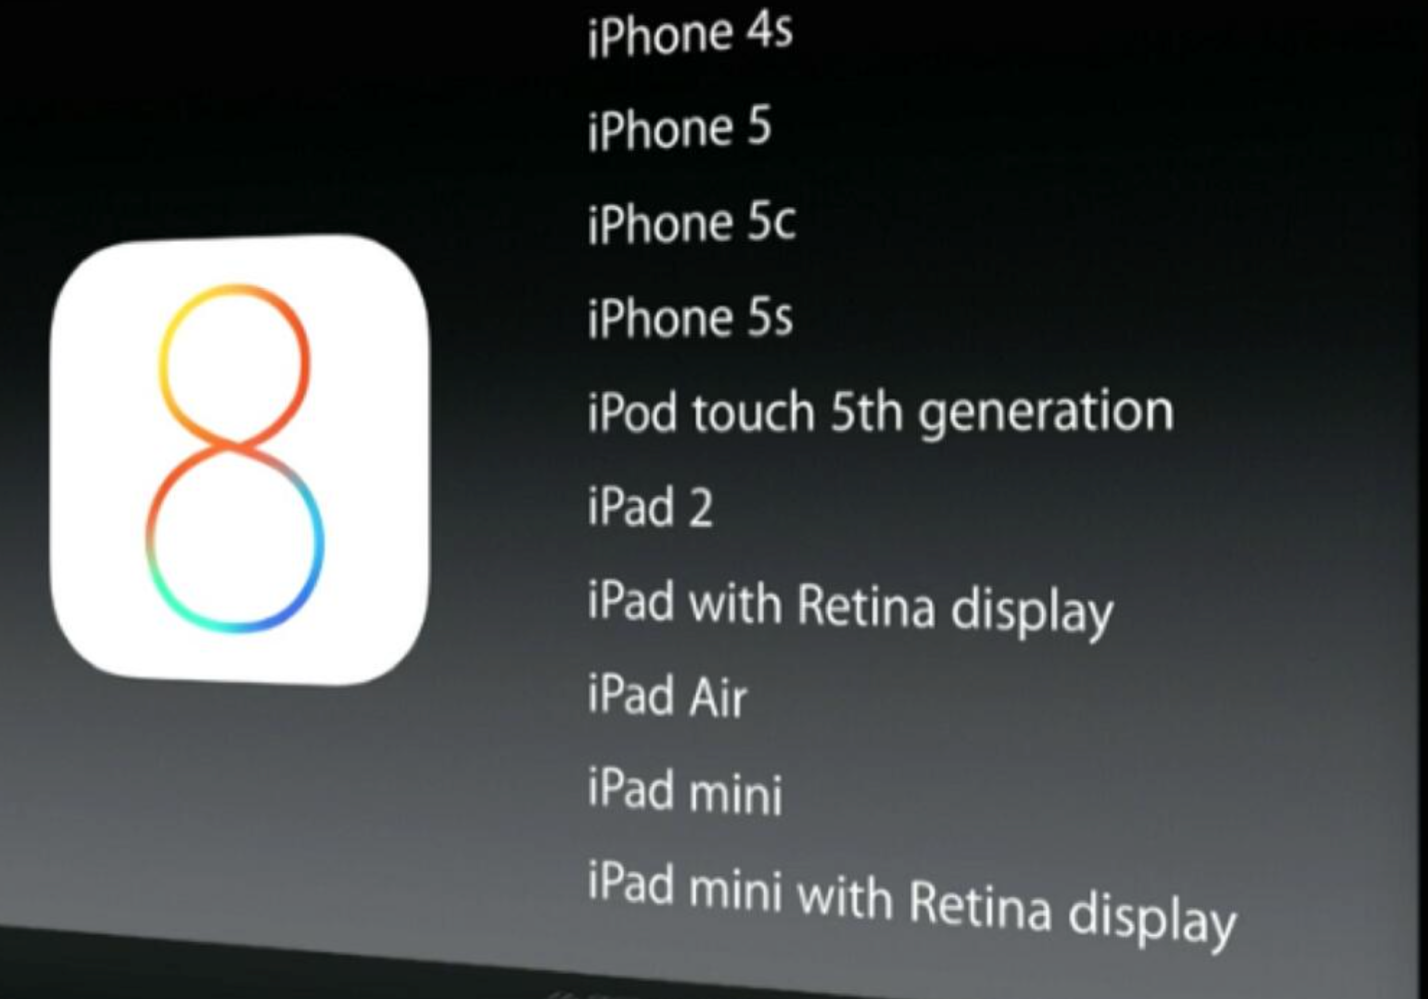 Apple Announces Ios 8 Device Compatibility Drops Support For Iphone 4 9to5mac - how to drop things on roblox ipad